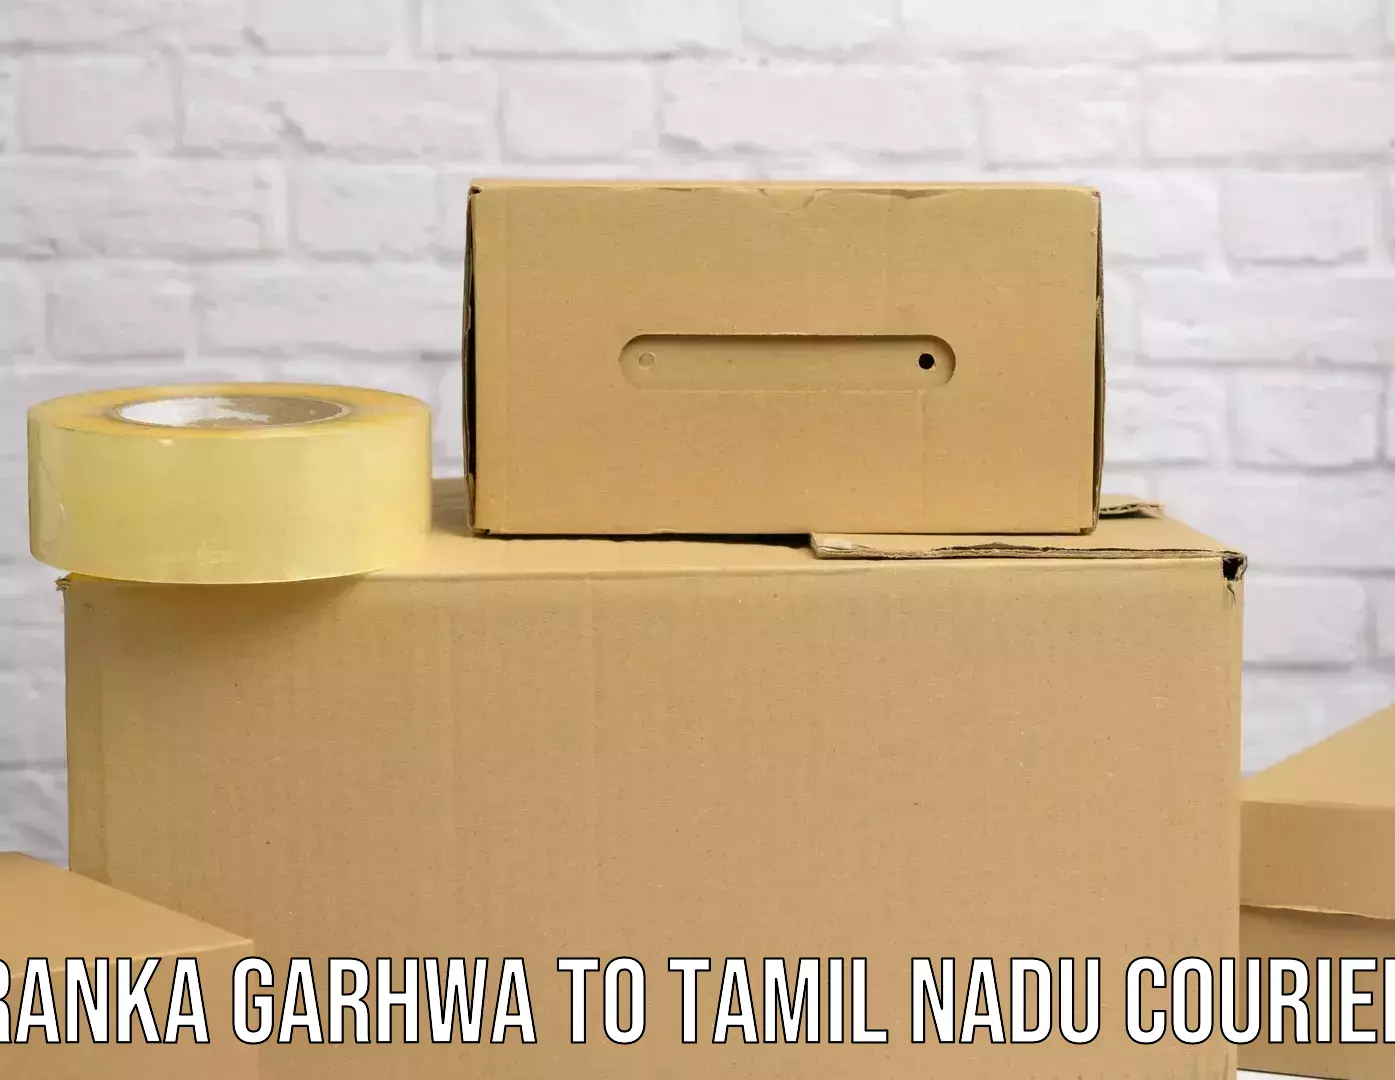 State-of-the-art courier technology Ranka Garhwa to Tamil Nadu